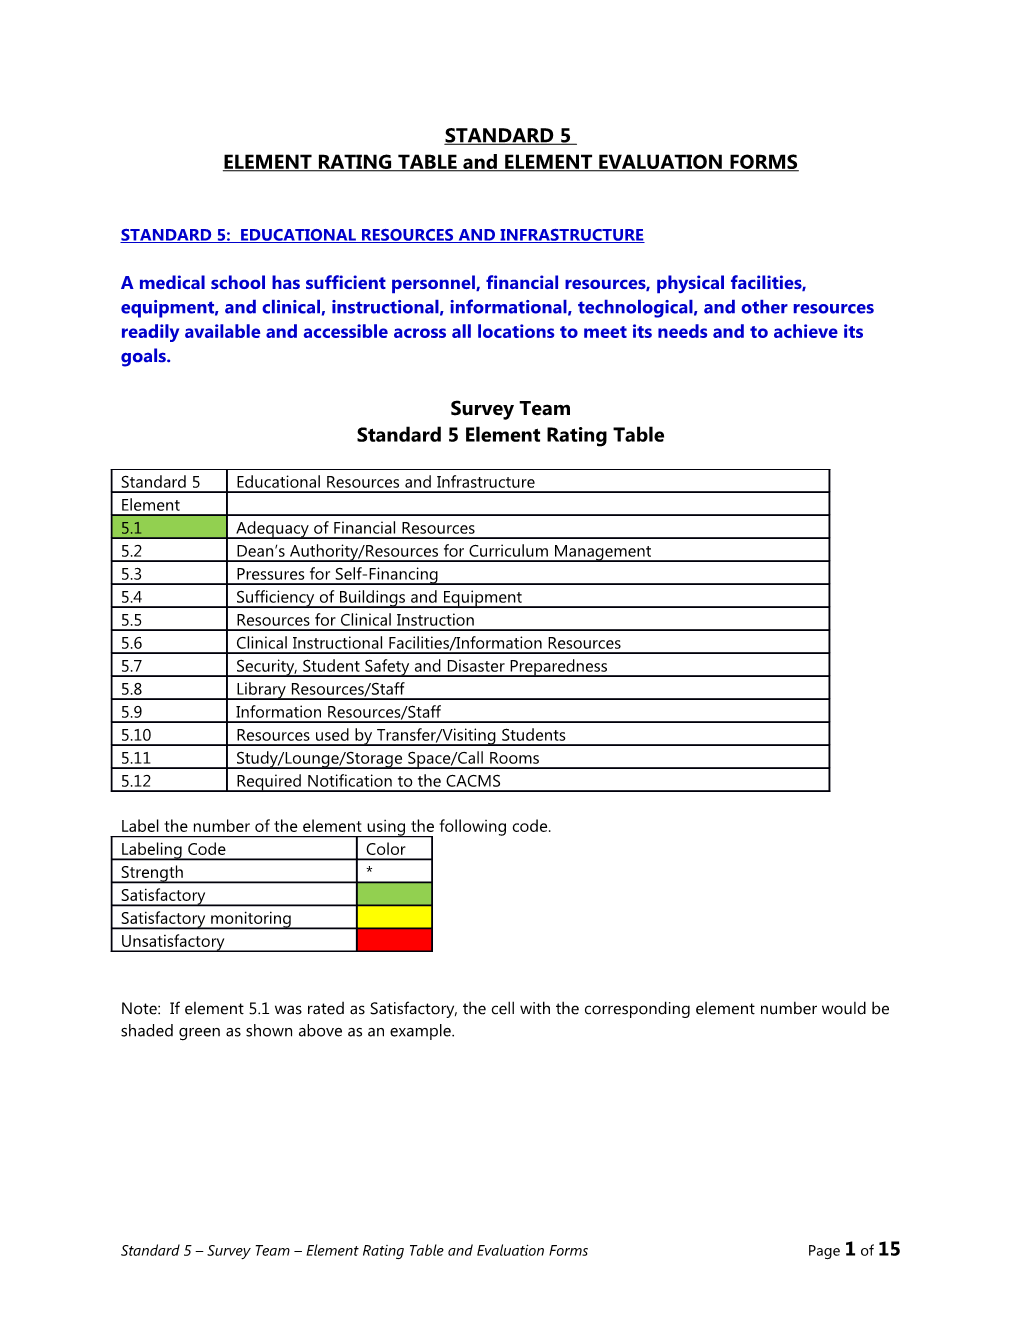 ELEMENT RATING TABLE and ELEMENT EVALUATION FORMS